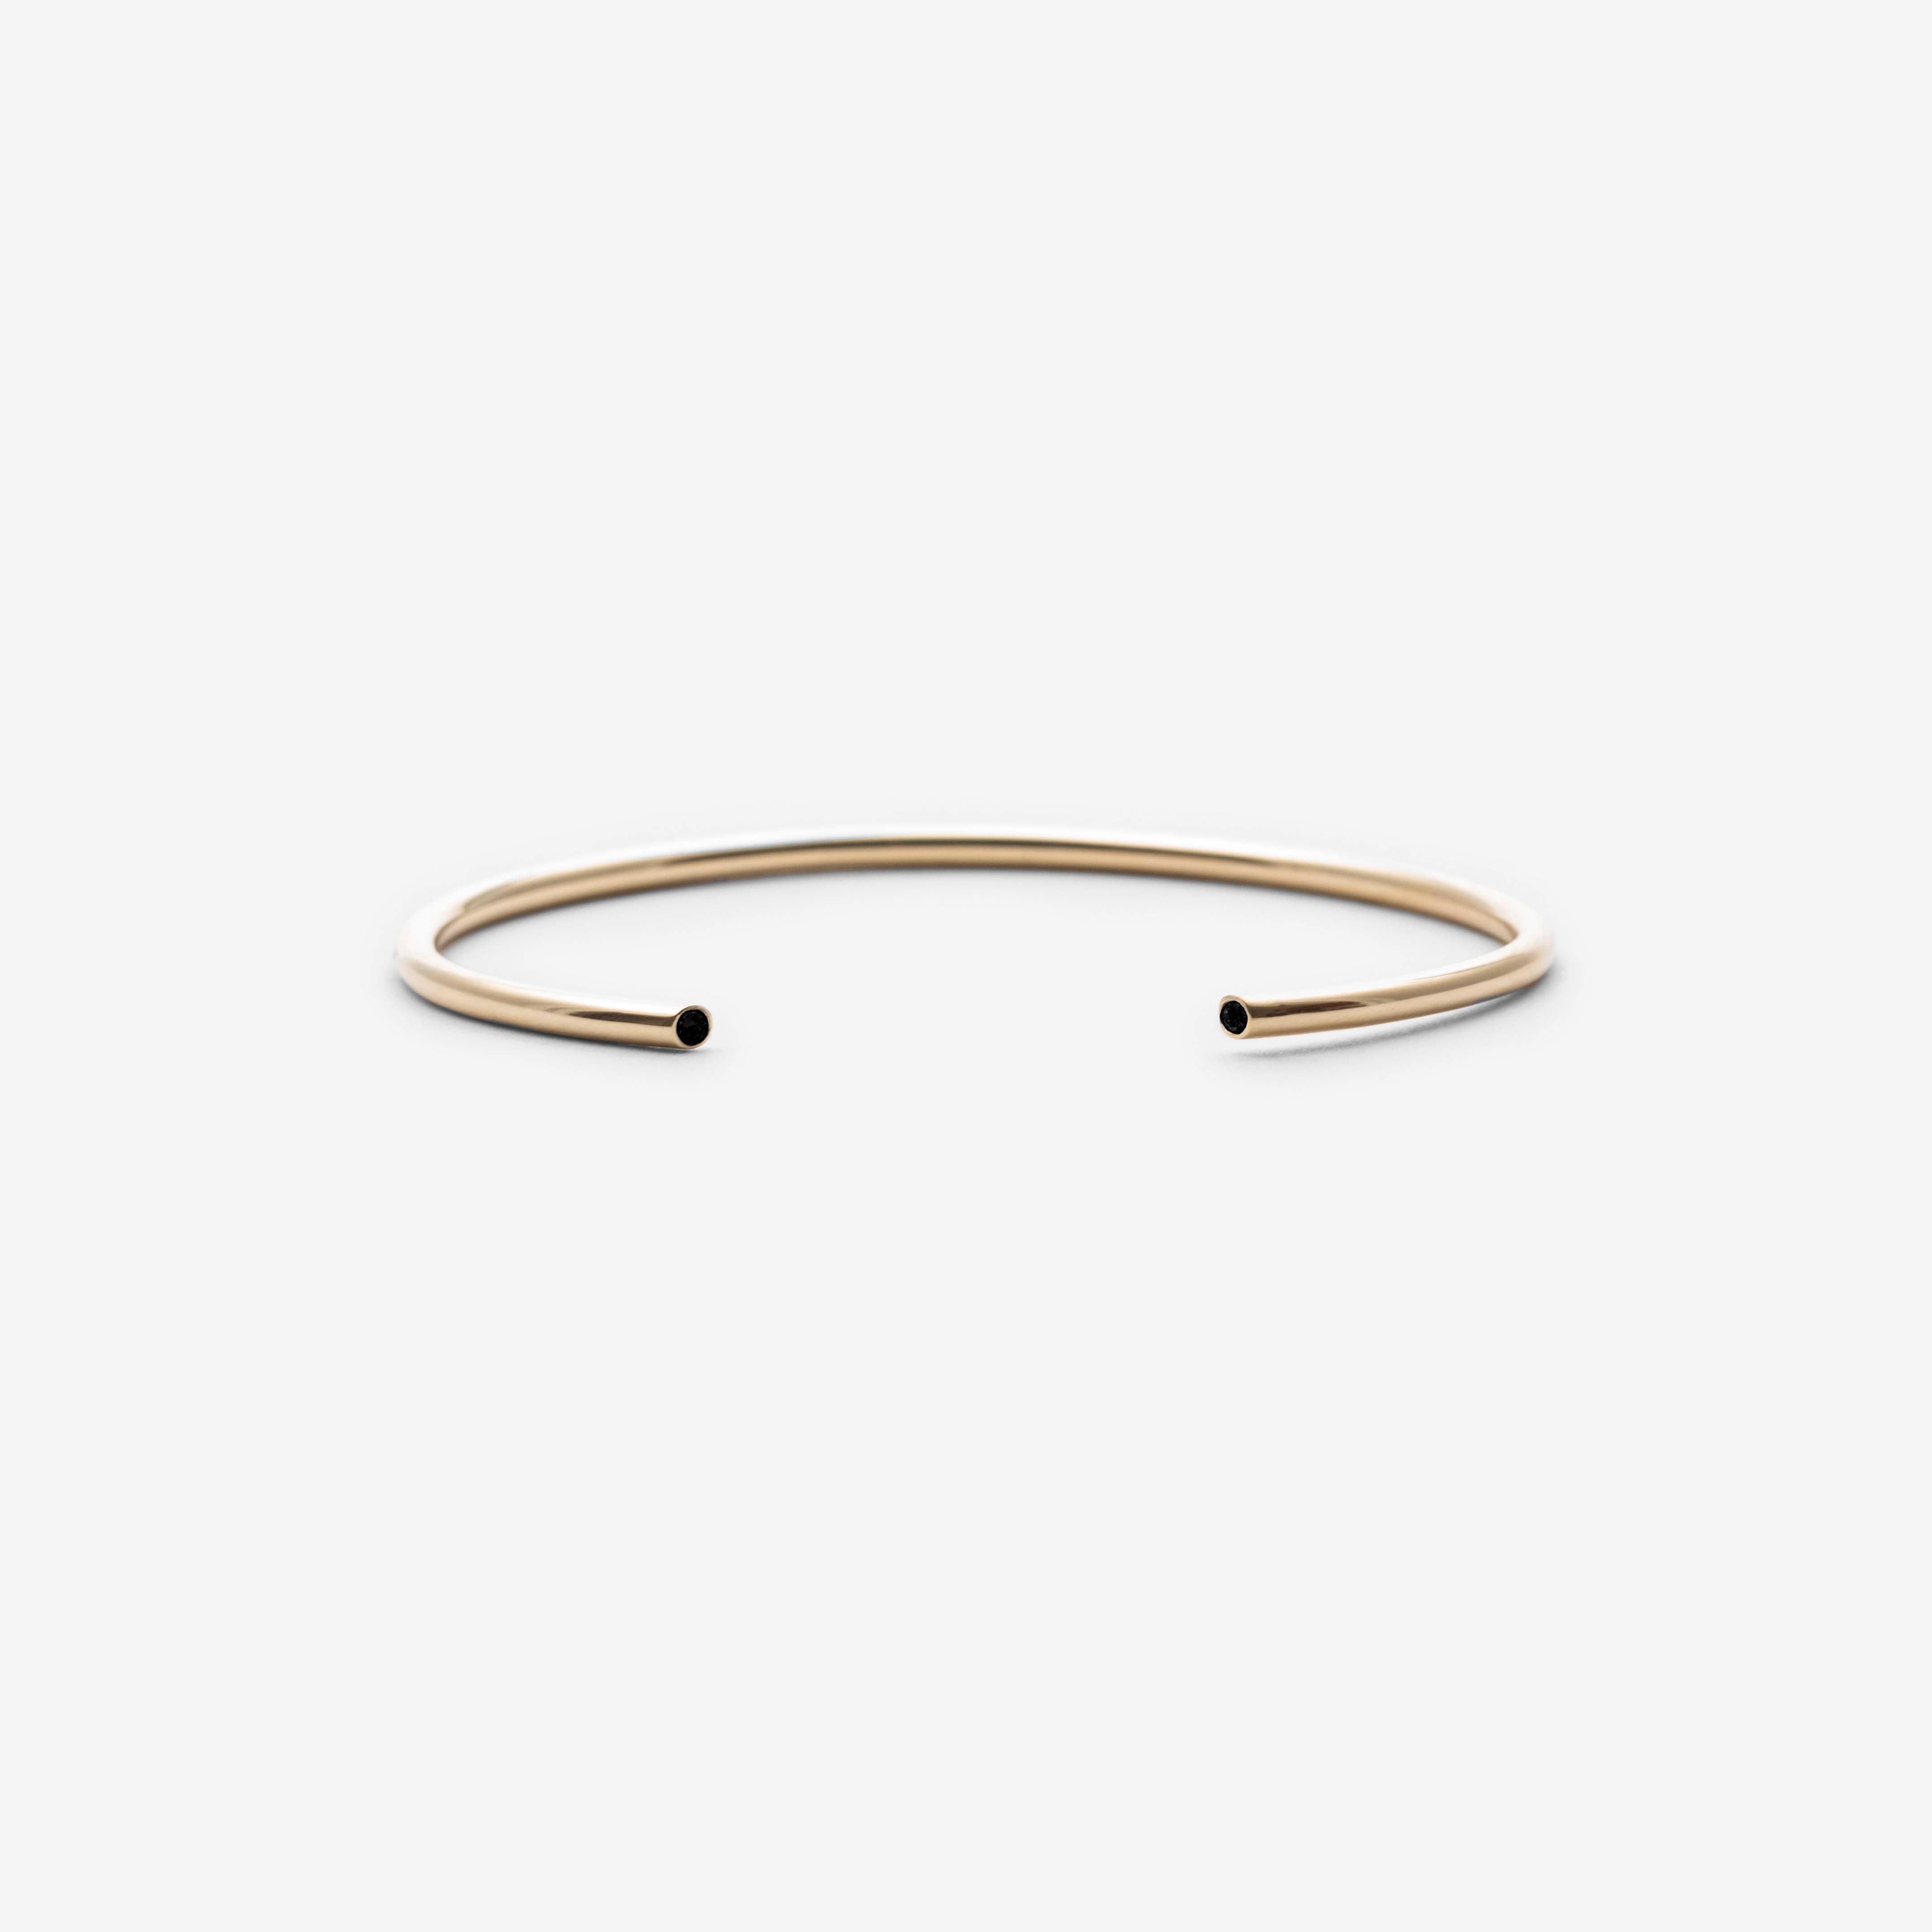 Olva Unconventional  Cuff in 14k Gold set with Black Diamonds By SHW Fine Jewelry New York City